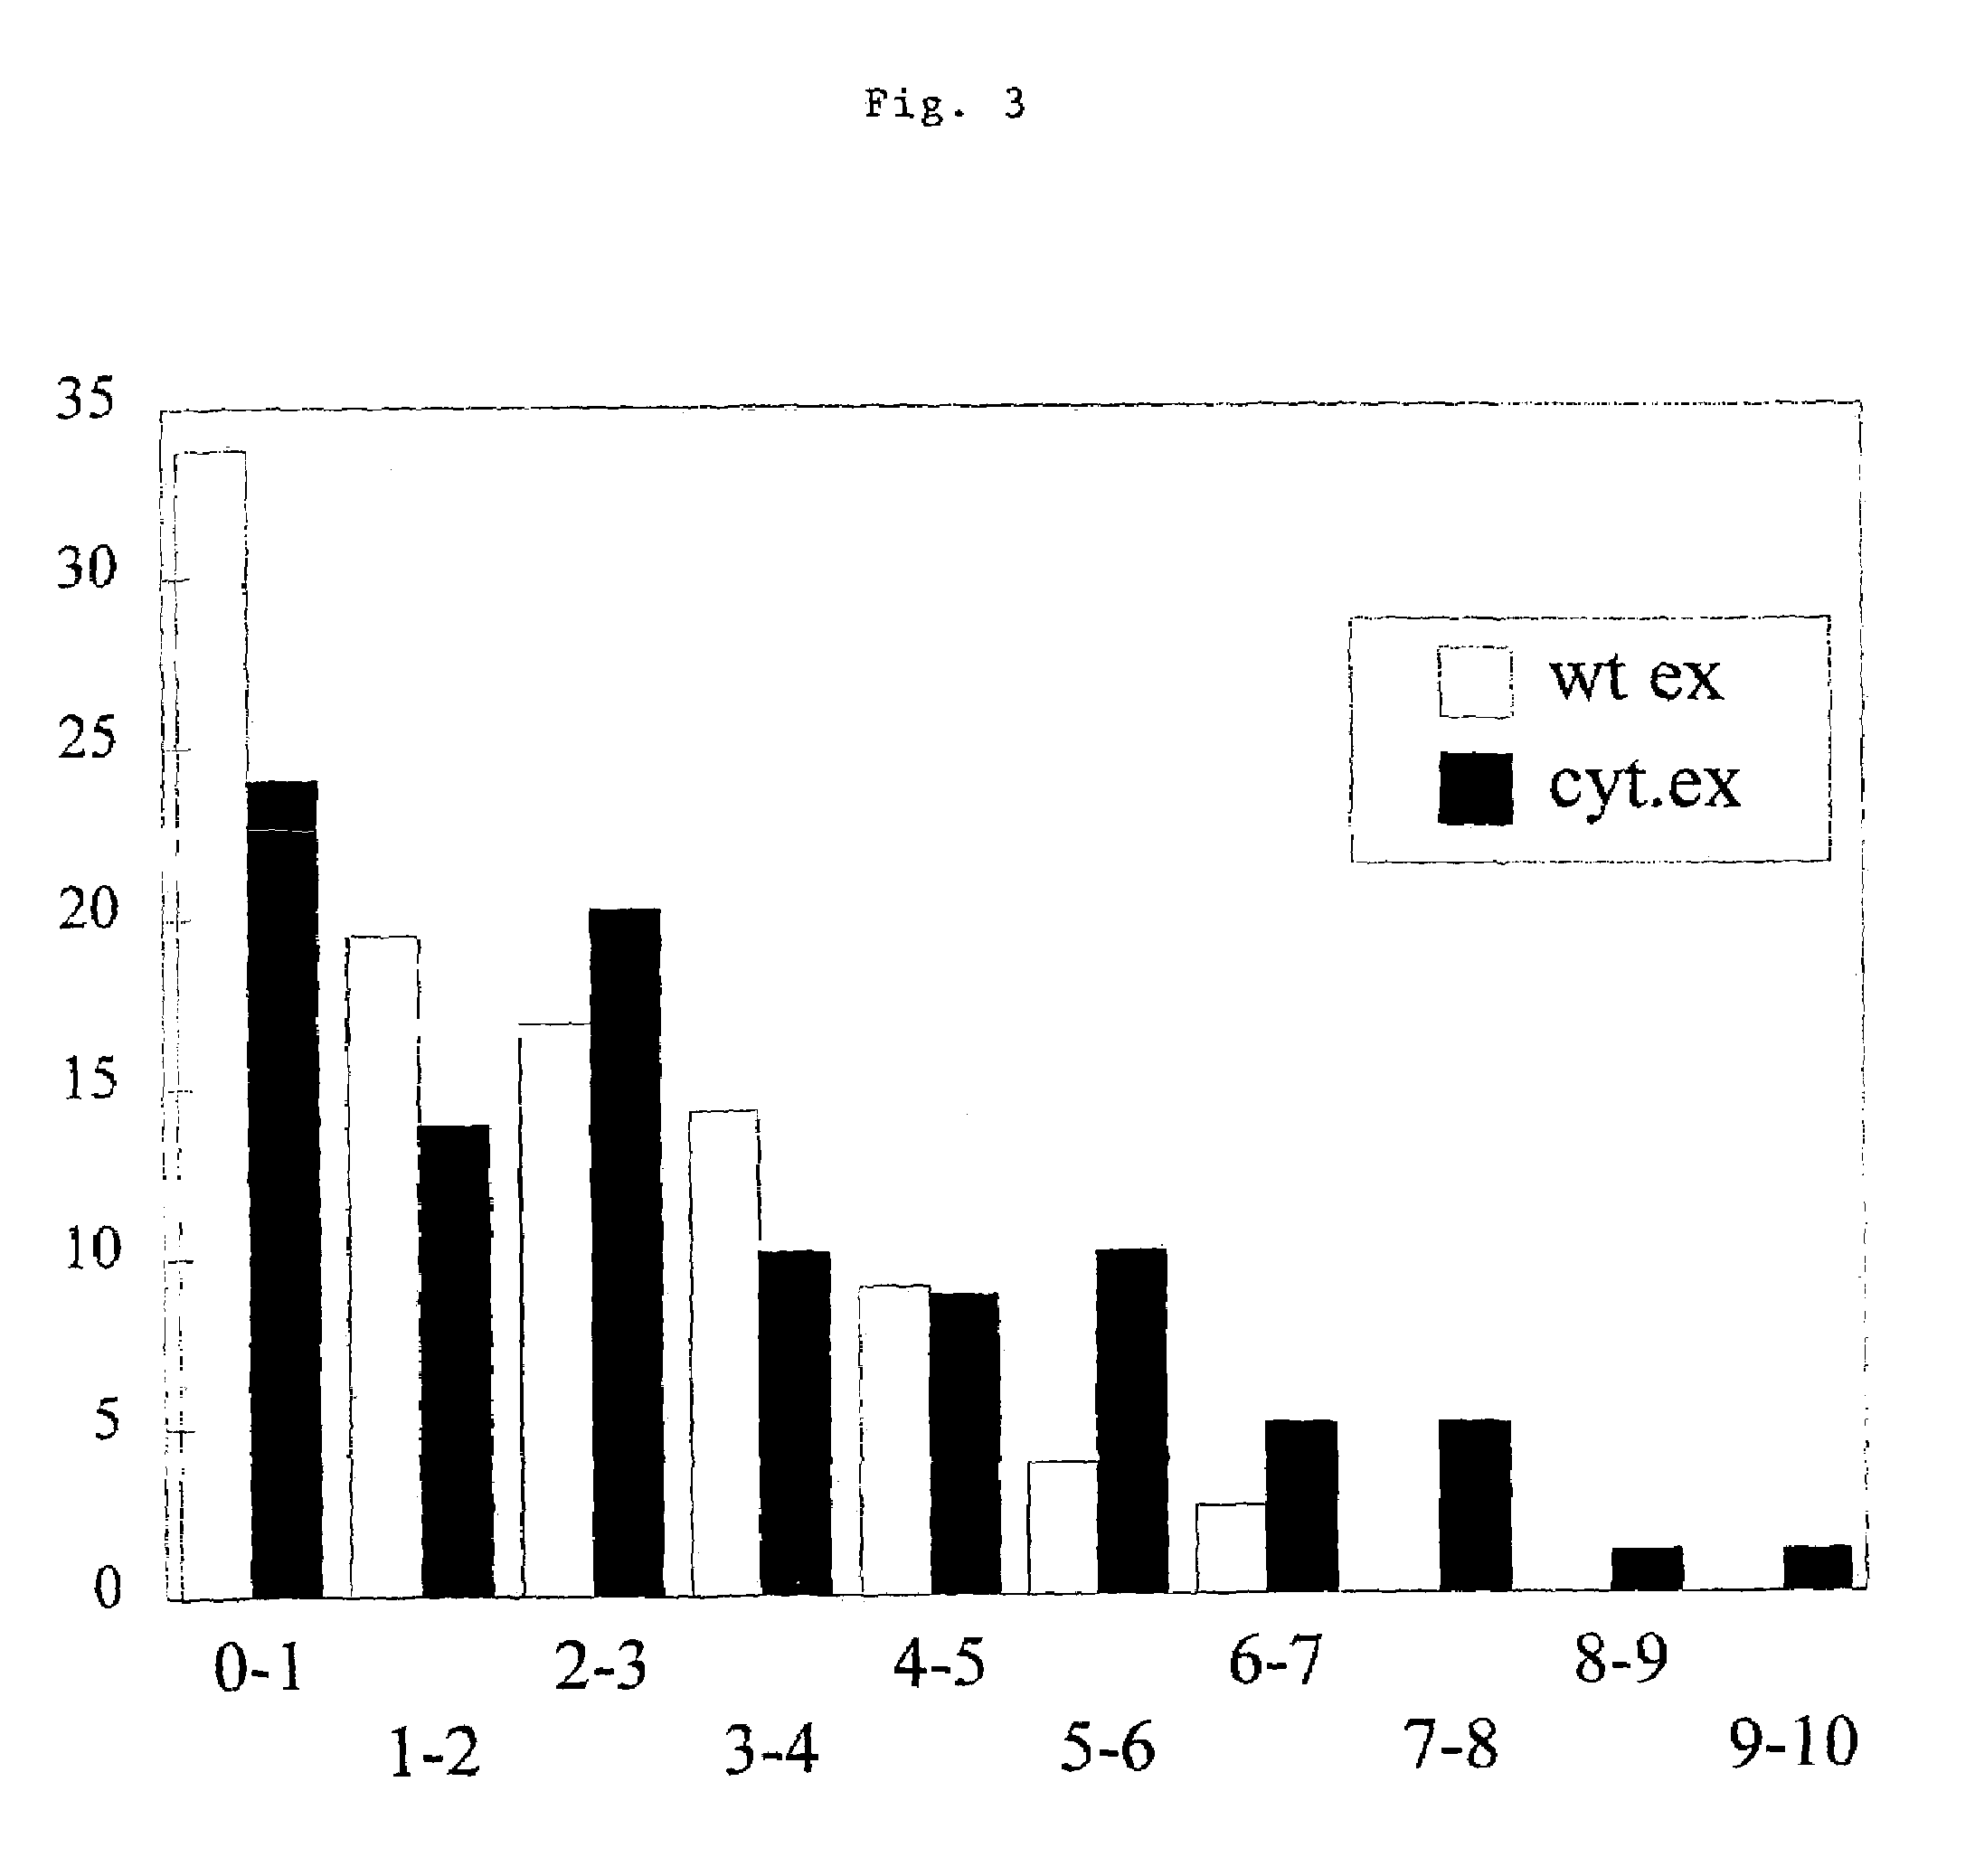 Method to localize expandase in the cytosol